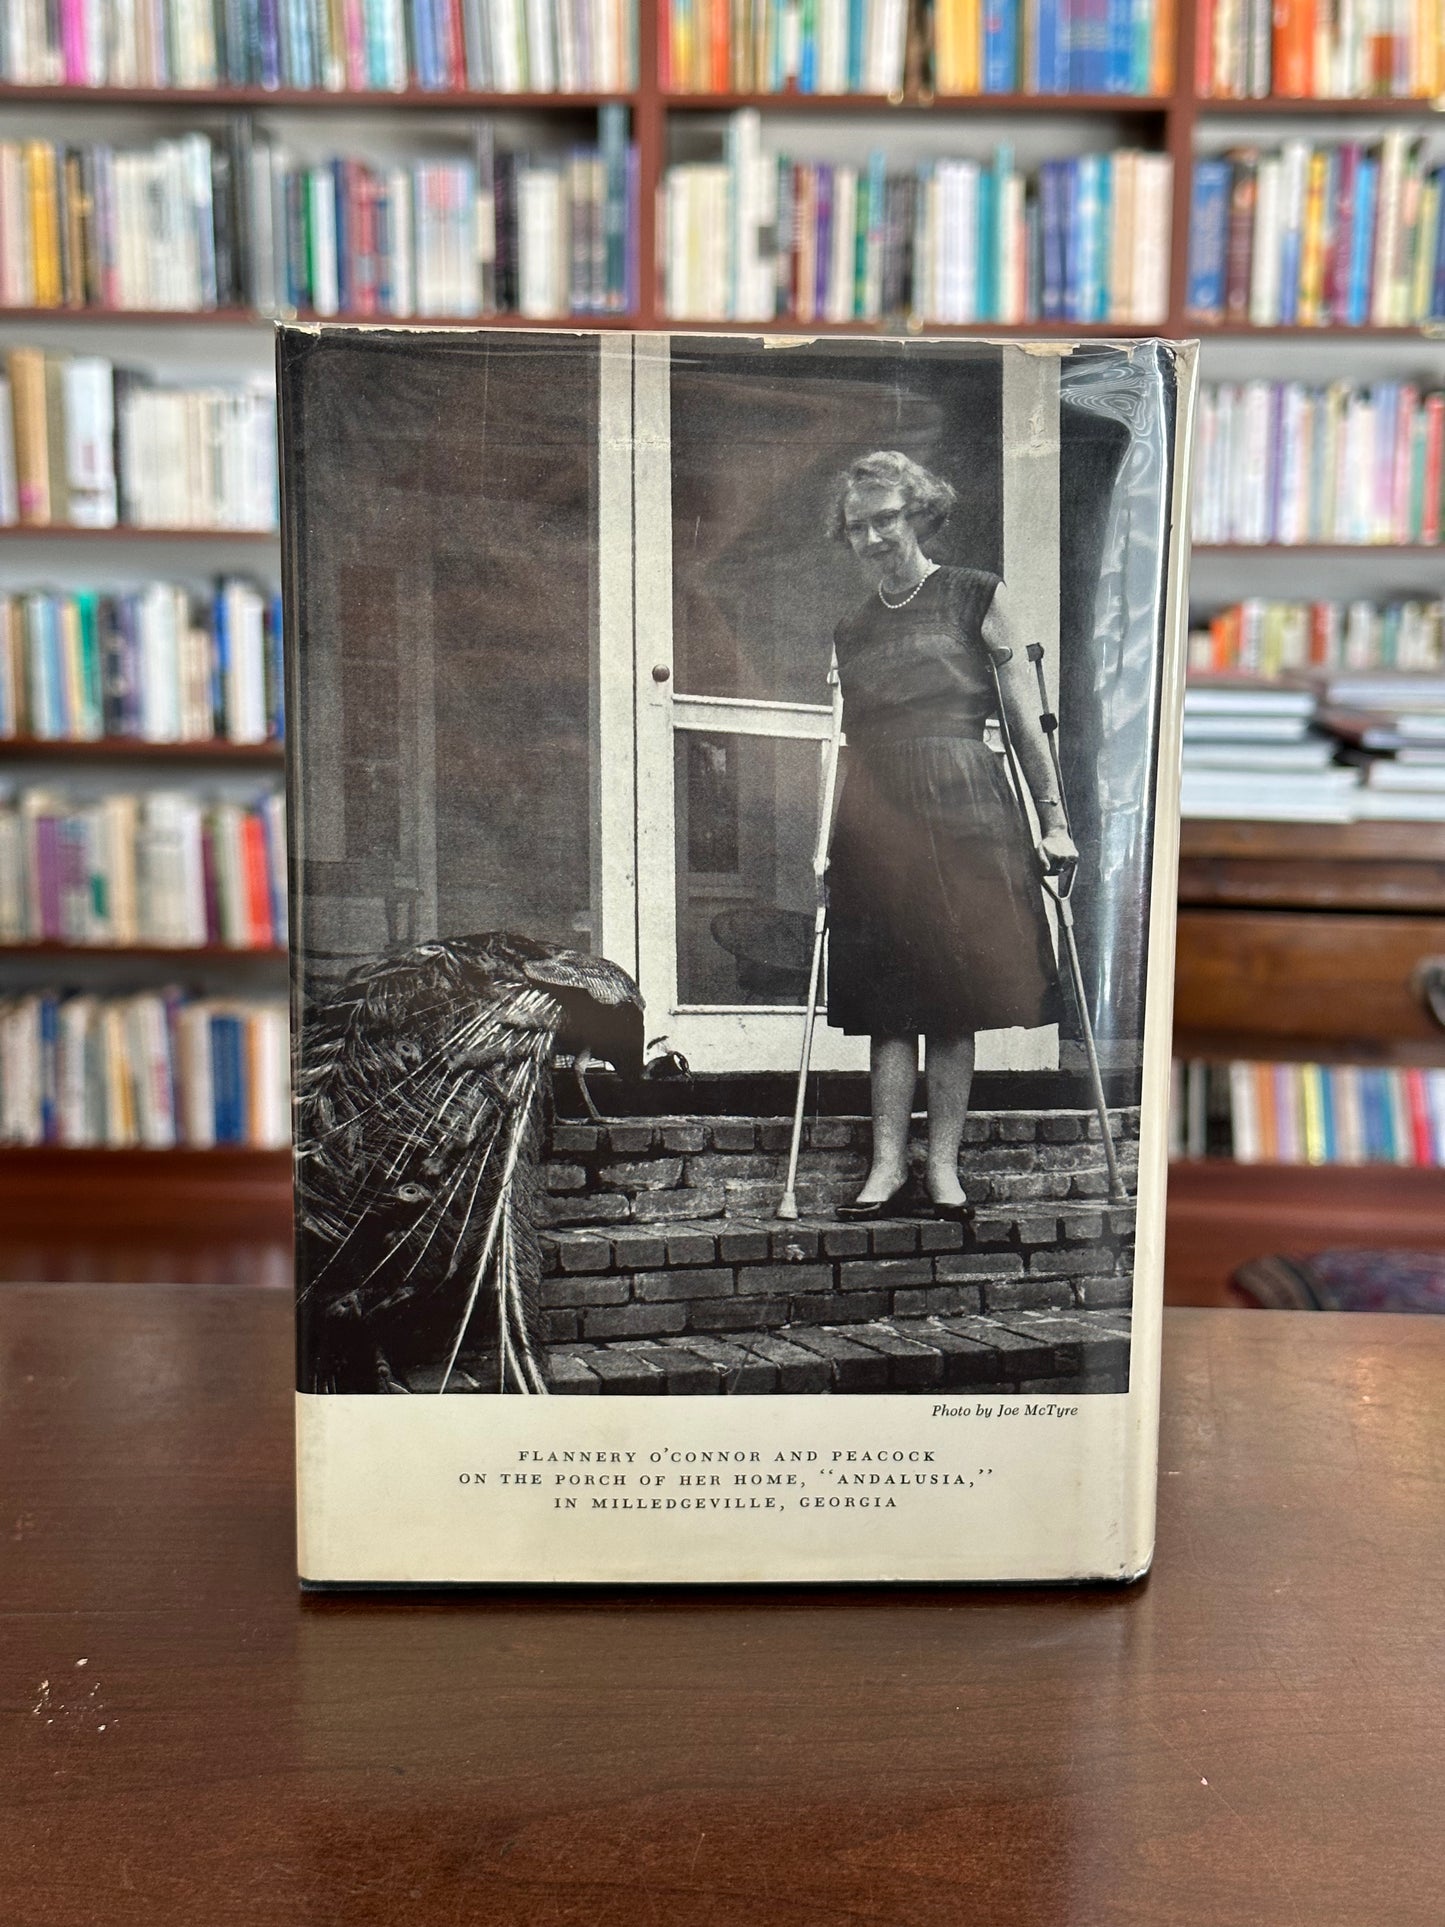 Letters of Flannery O’Connor: The Habit of Being